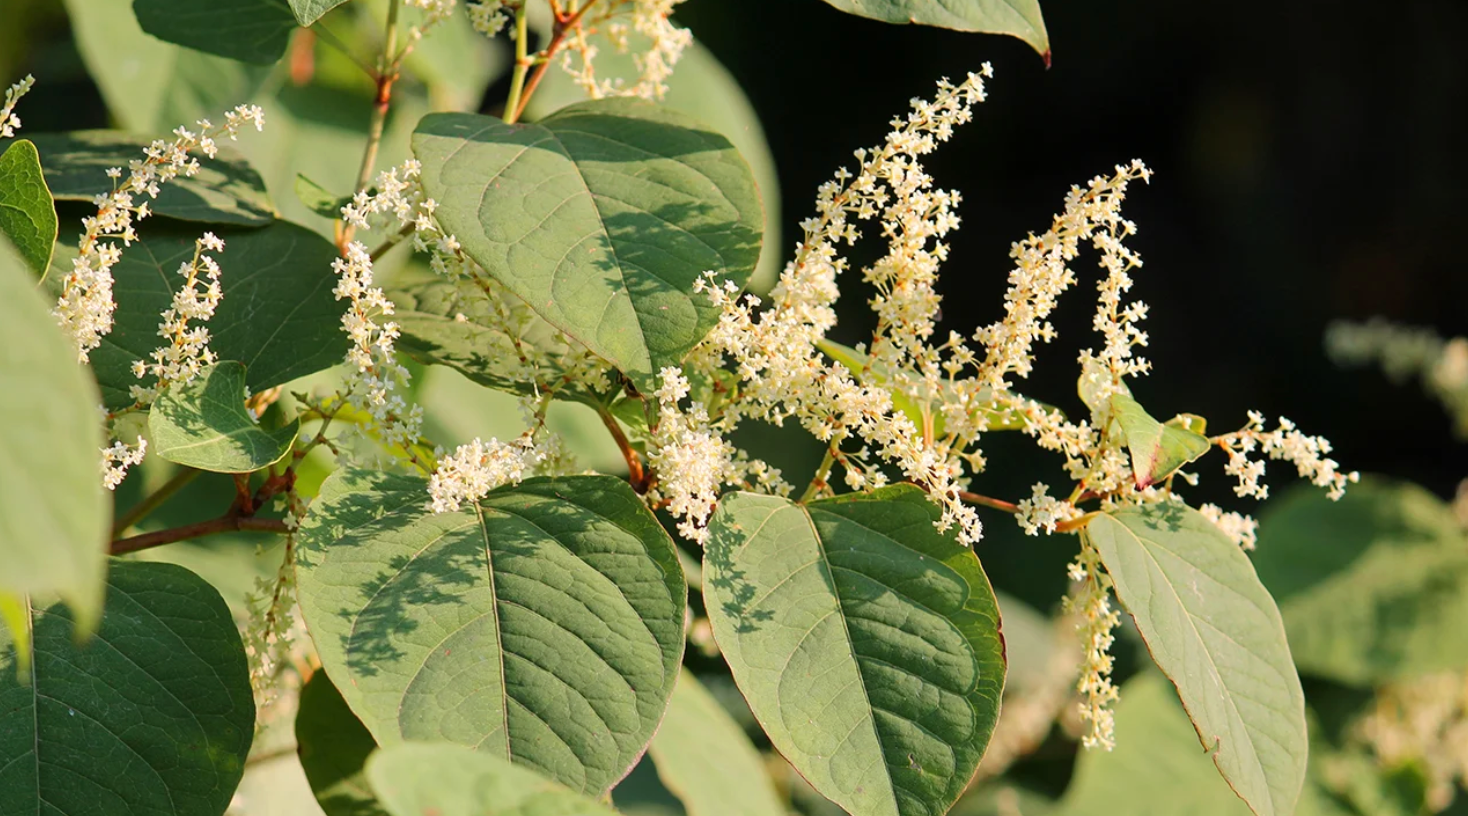 Giant Knotweed: A Powerful Source of Resveratrol for Heart Health and Antioxidant Support